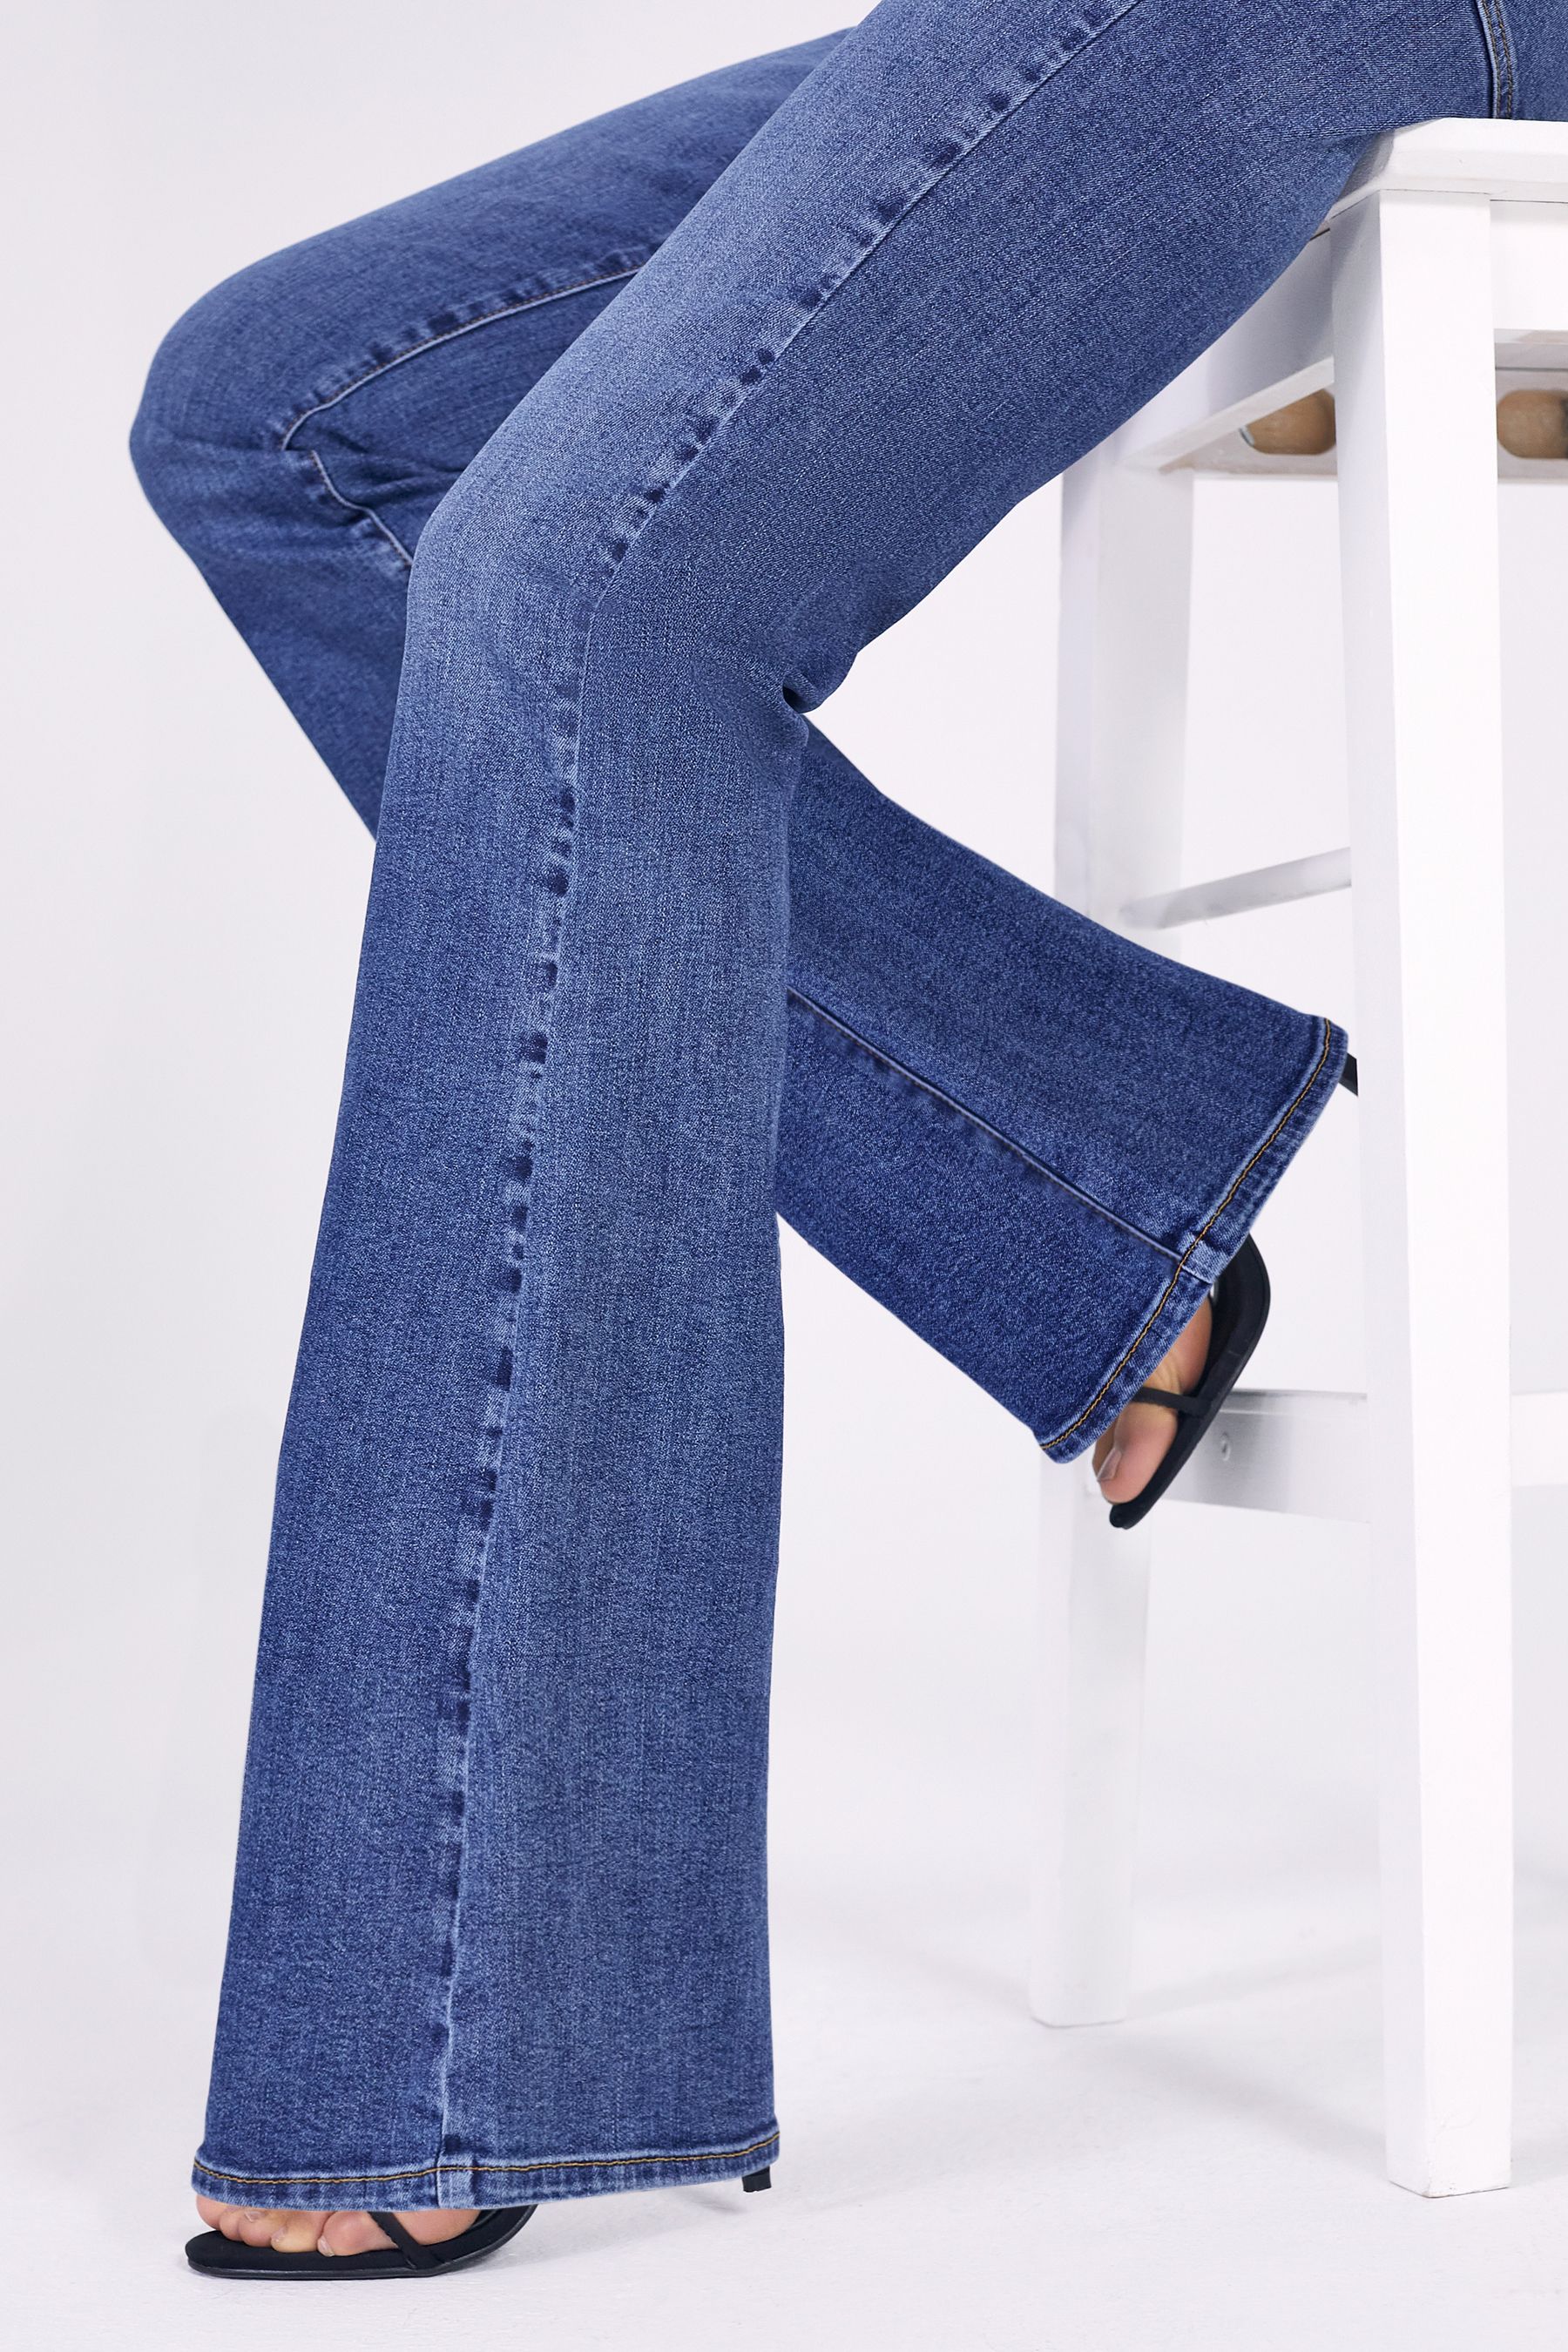 Buy Lipsy Mid Rise Chloe Flare Jeans from the Next UK online shop